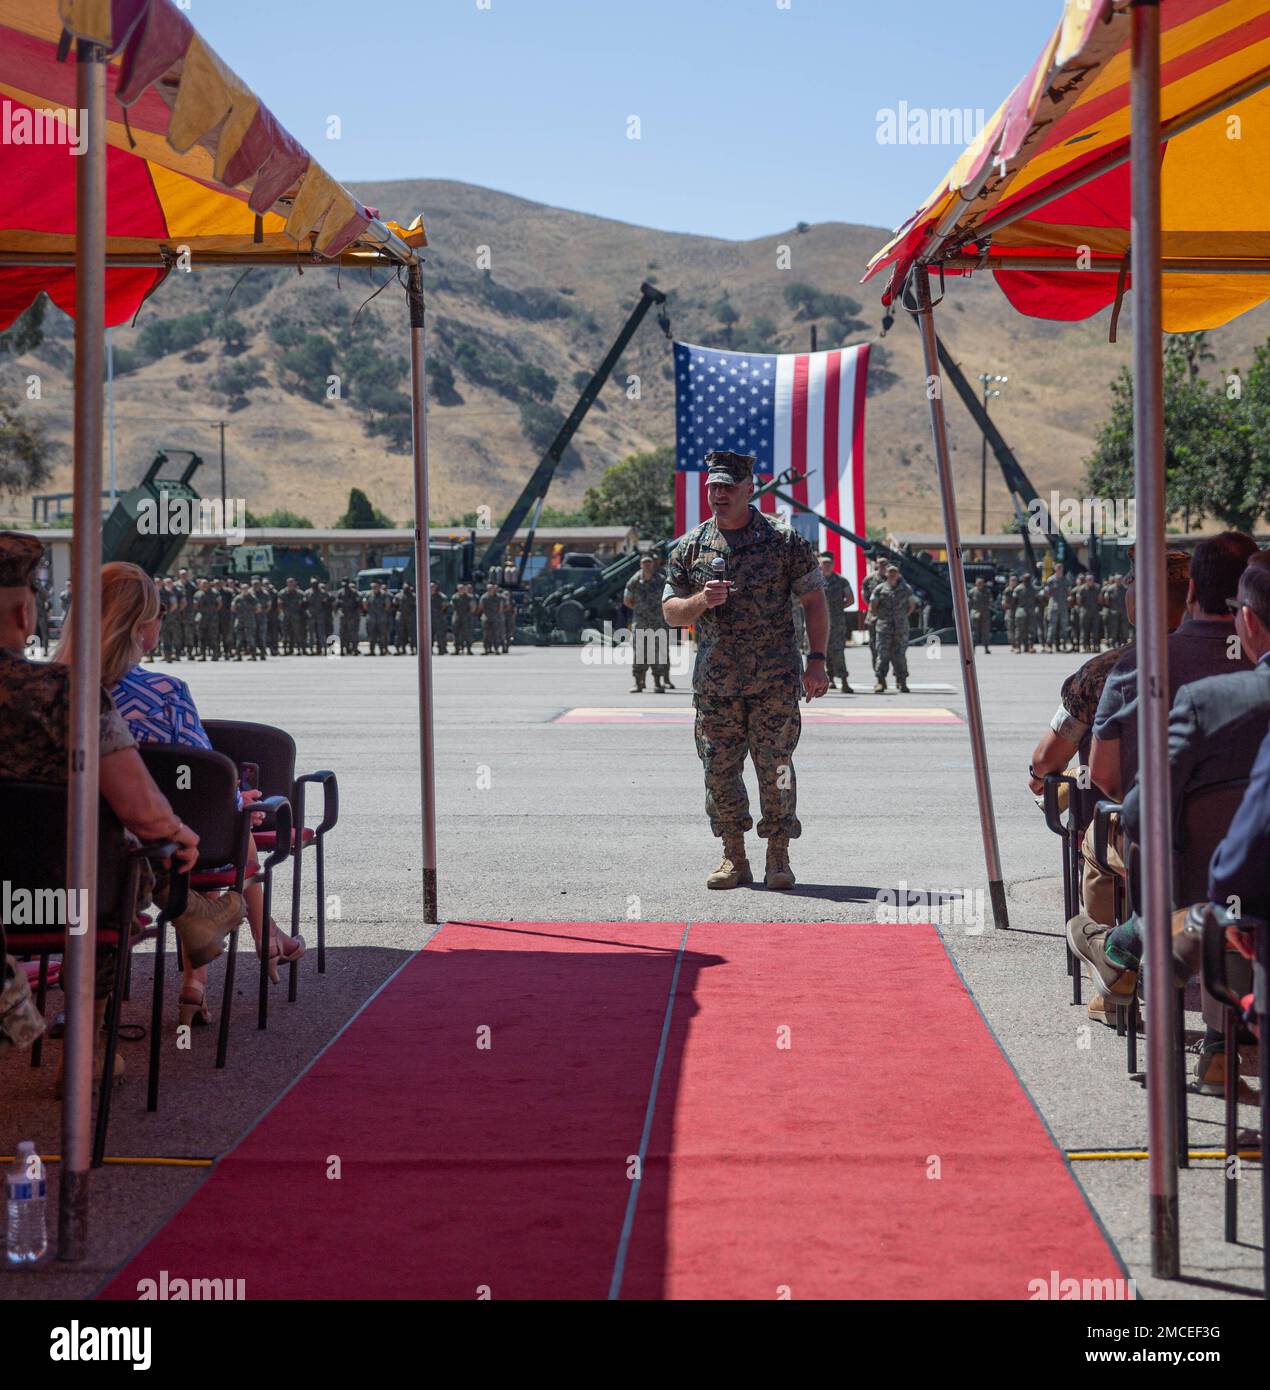 U.S. Marine Corps Col. Patrick Eldridge, the incoming commanding officer of 11th Marine Regiment, 1st Marine Division, speaks to Marines and families during a change of command ceremony at Marine Corps Base Camp Pendleton, California, June 30, 2022. During the ceremony, Col. Daniel Skuce relinquished command of 11th Marine Regiment to Eldridge. Stock Photo